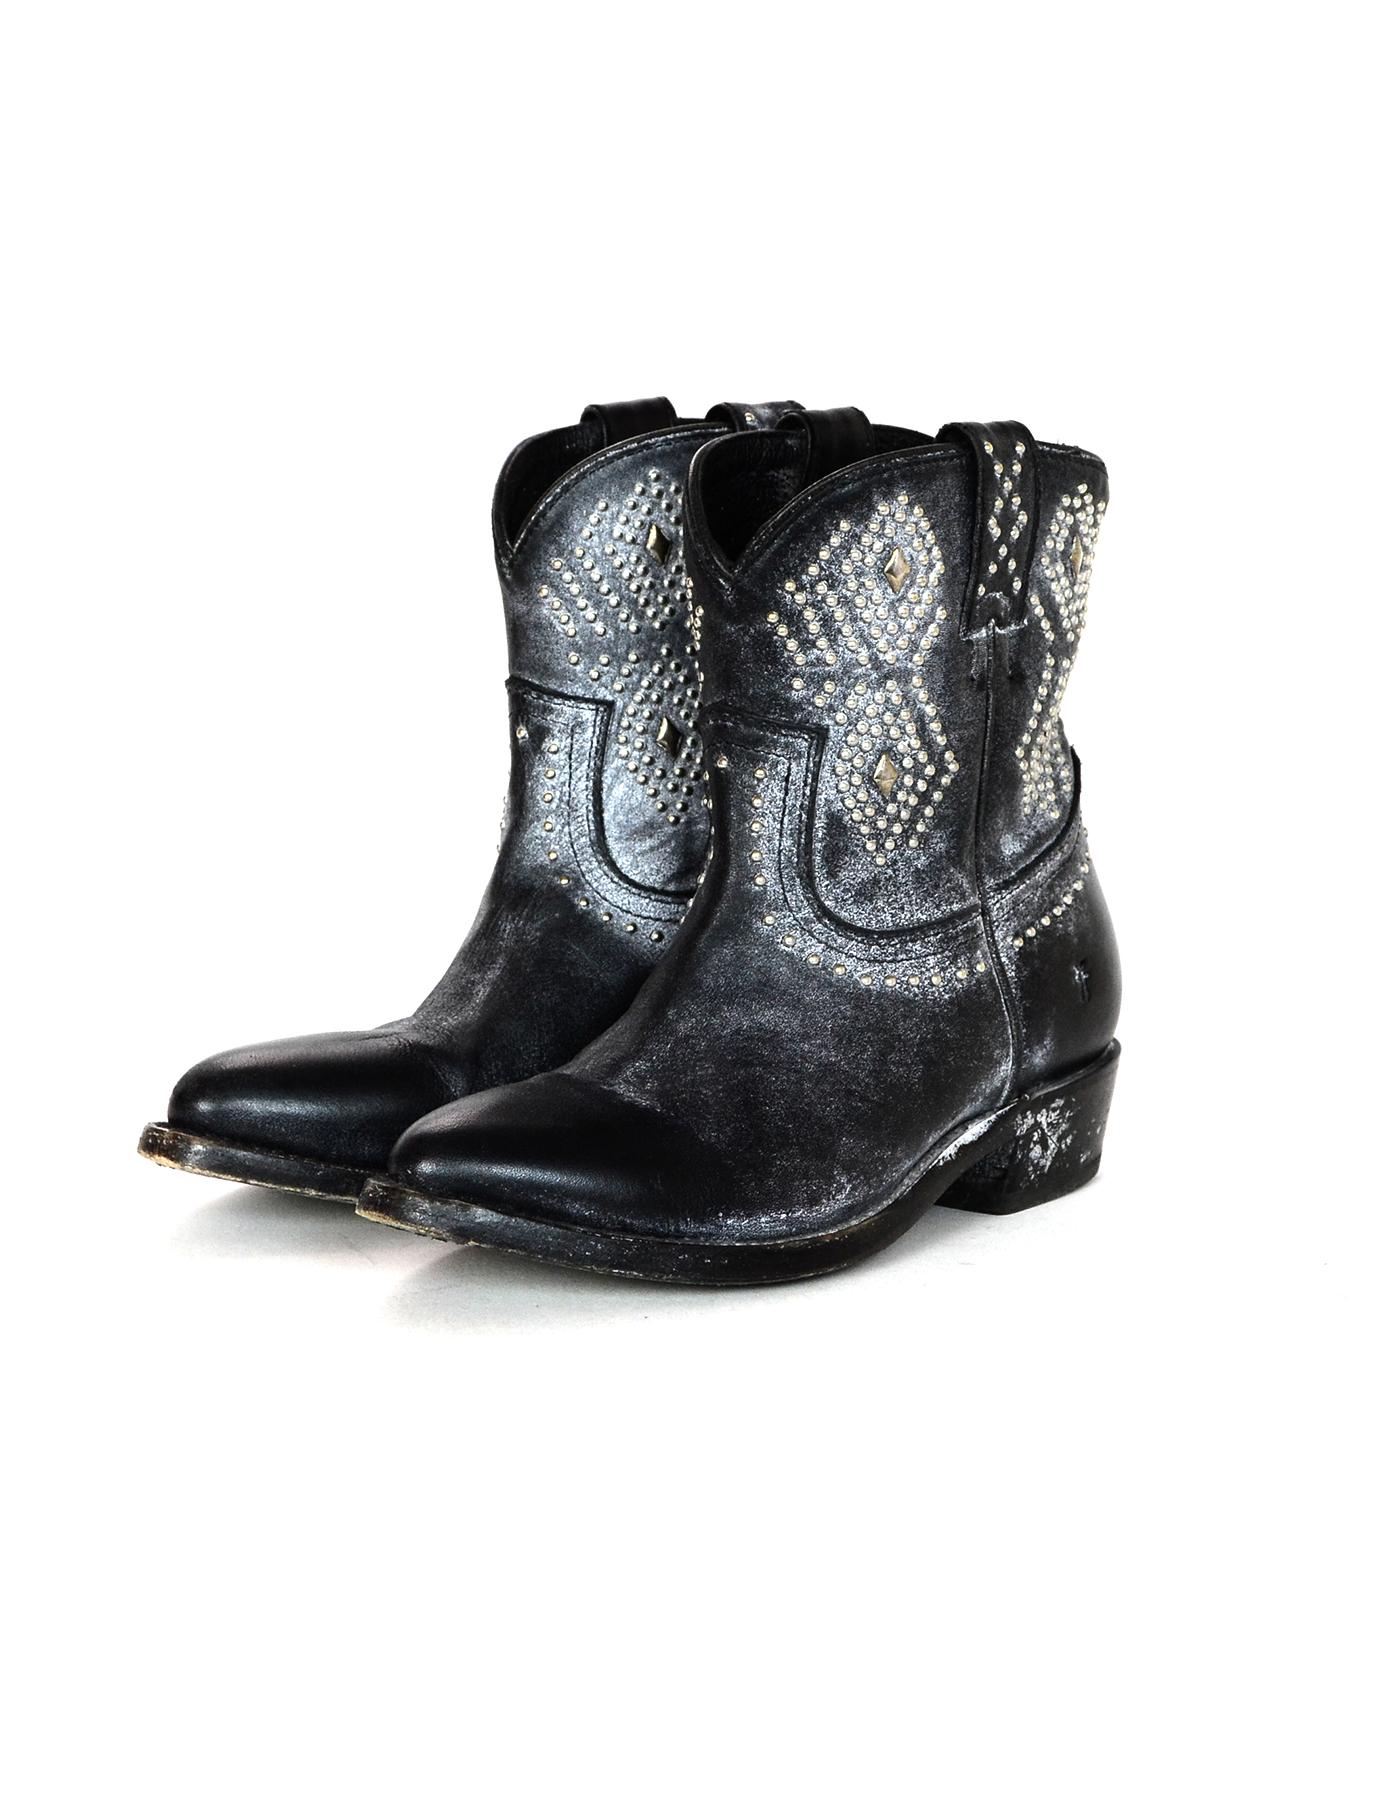 Frye Black Leather Billy Studded Short Boots Sz 5.5

Made In: Mexico
Color: Black, silver
Hardware: Silver
Materials: Antiqued leather and metal
Closure/Opening:  Pull on
Overall Condition: Excellent pre-owned condition with exception of minor wear